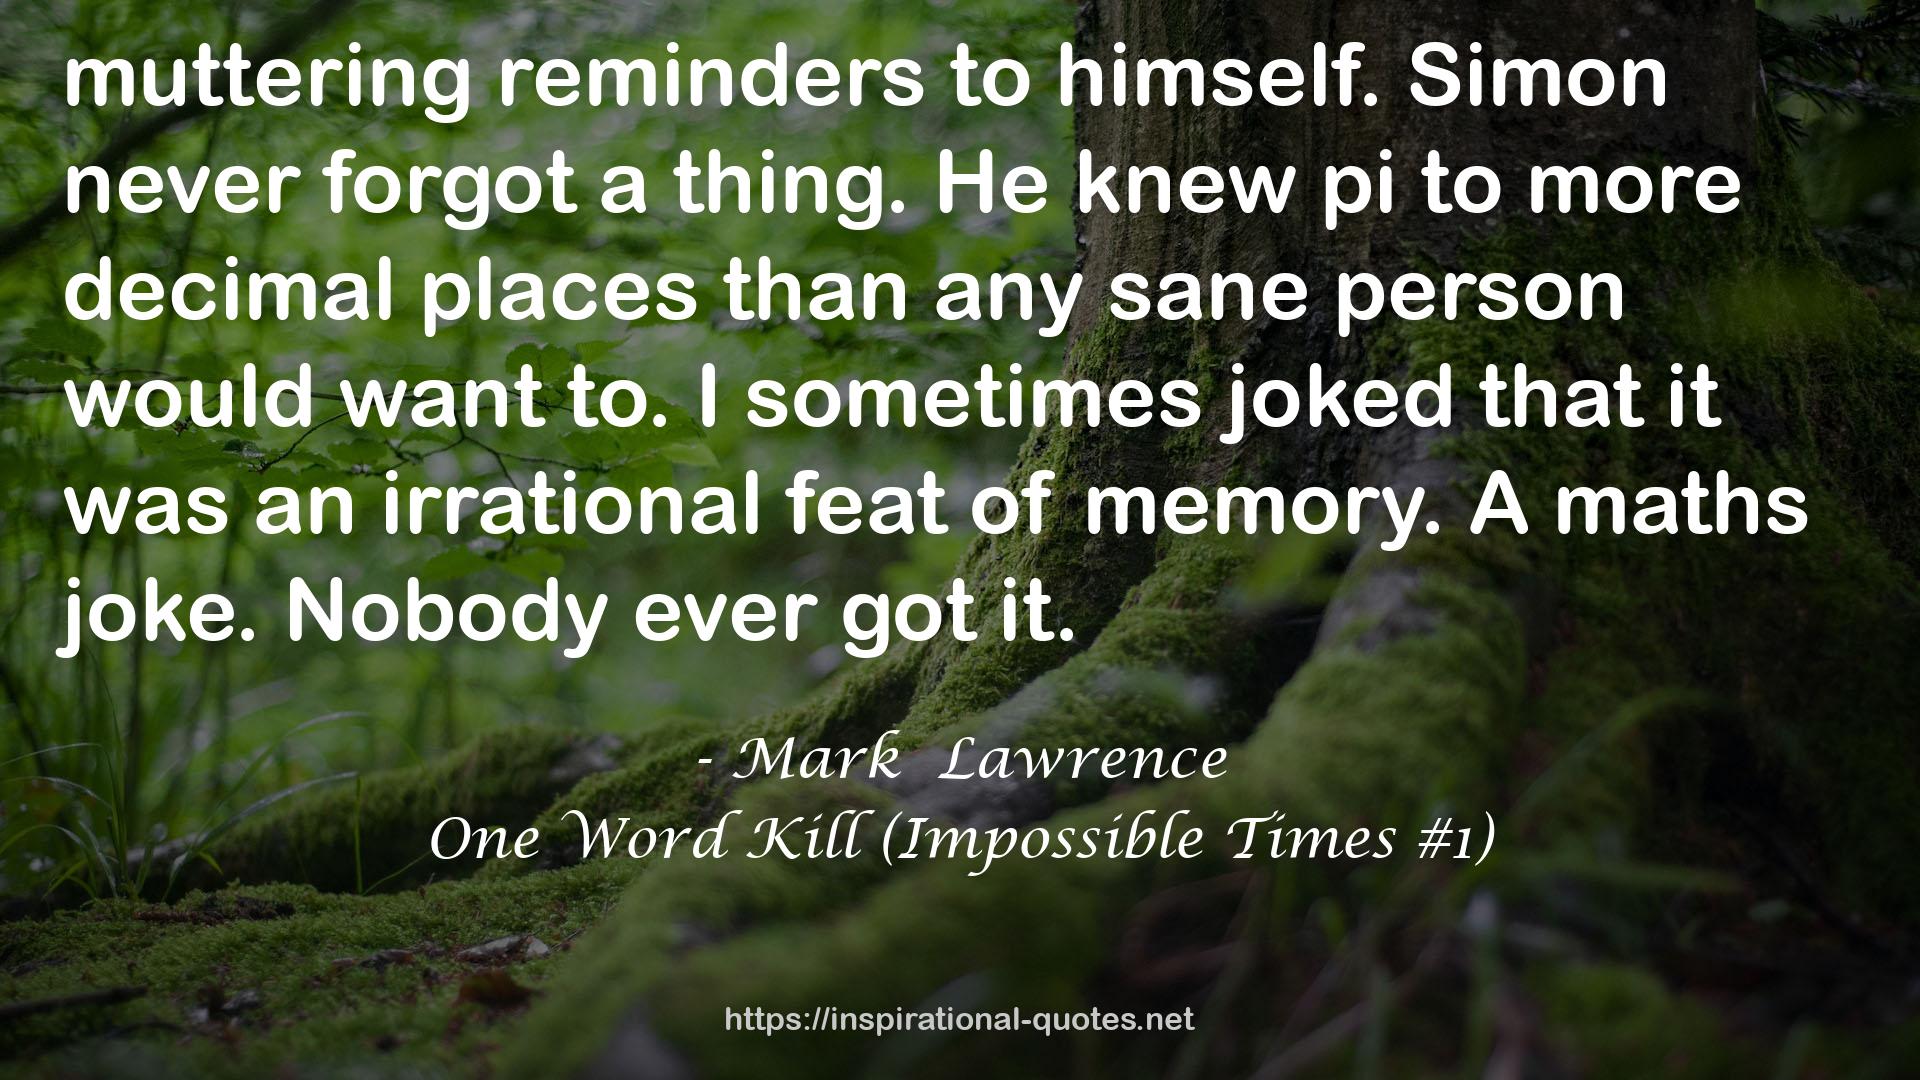 One Word Kill (Impossible Times #1) QUOTES